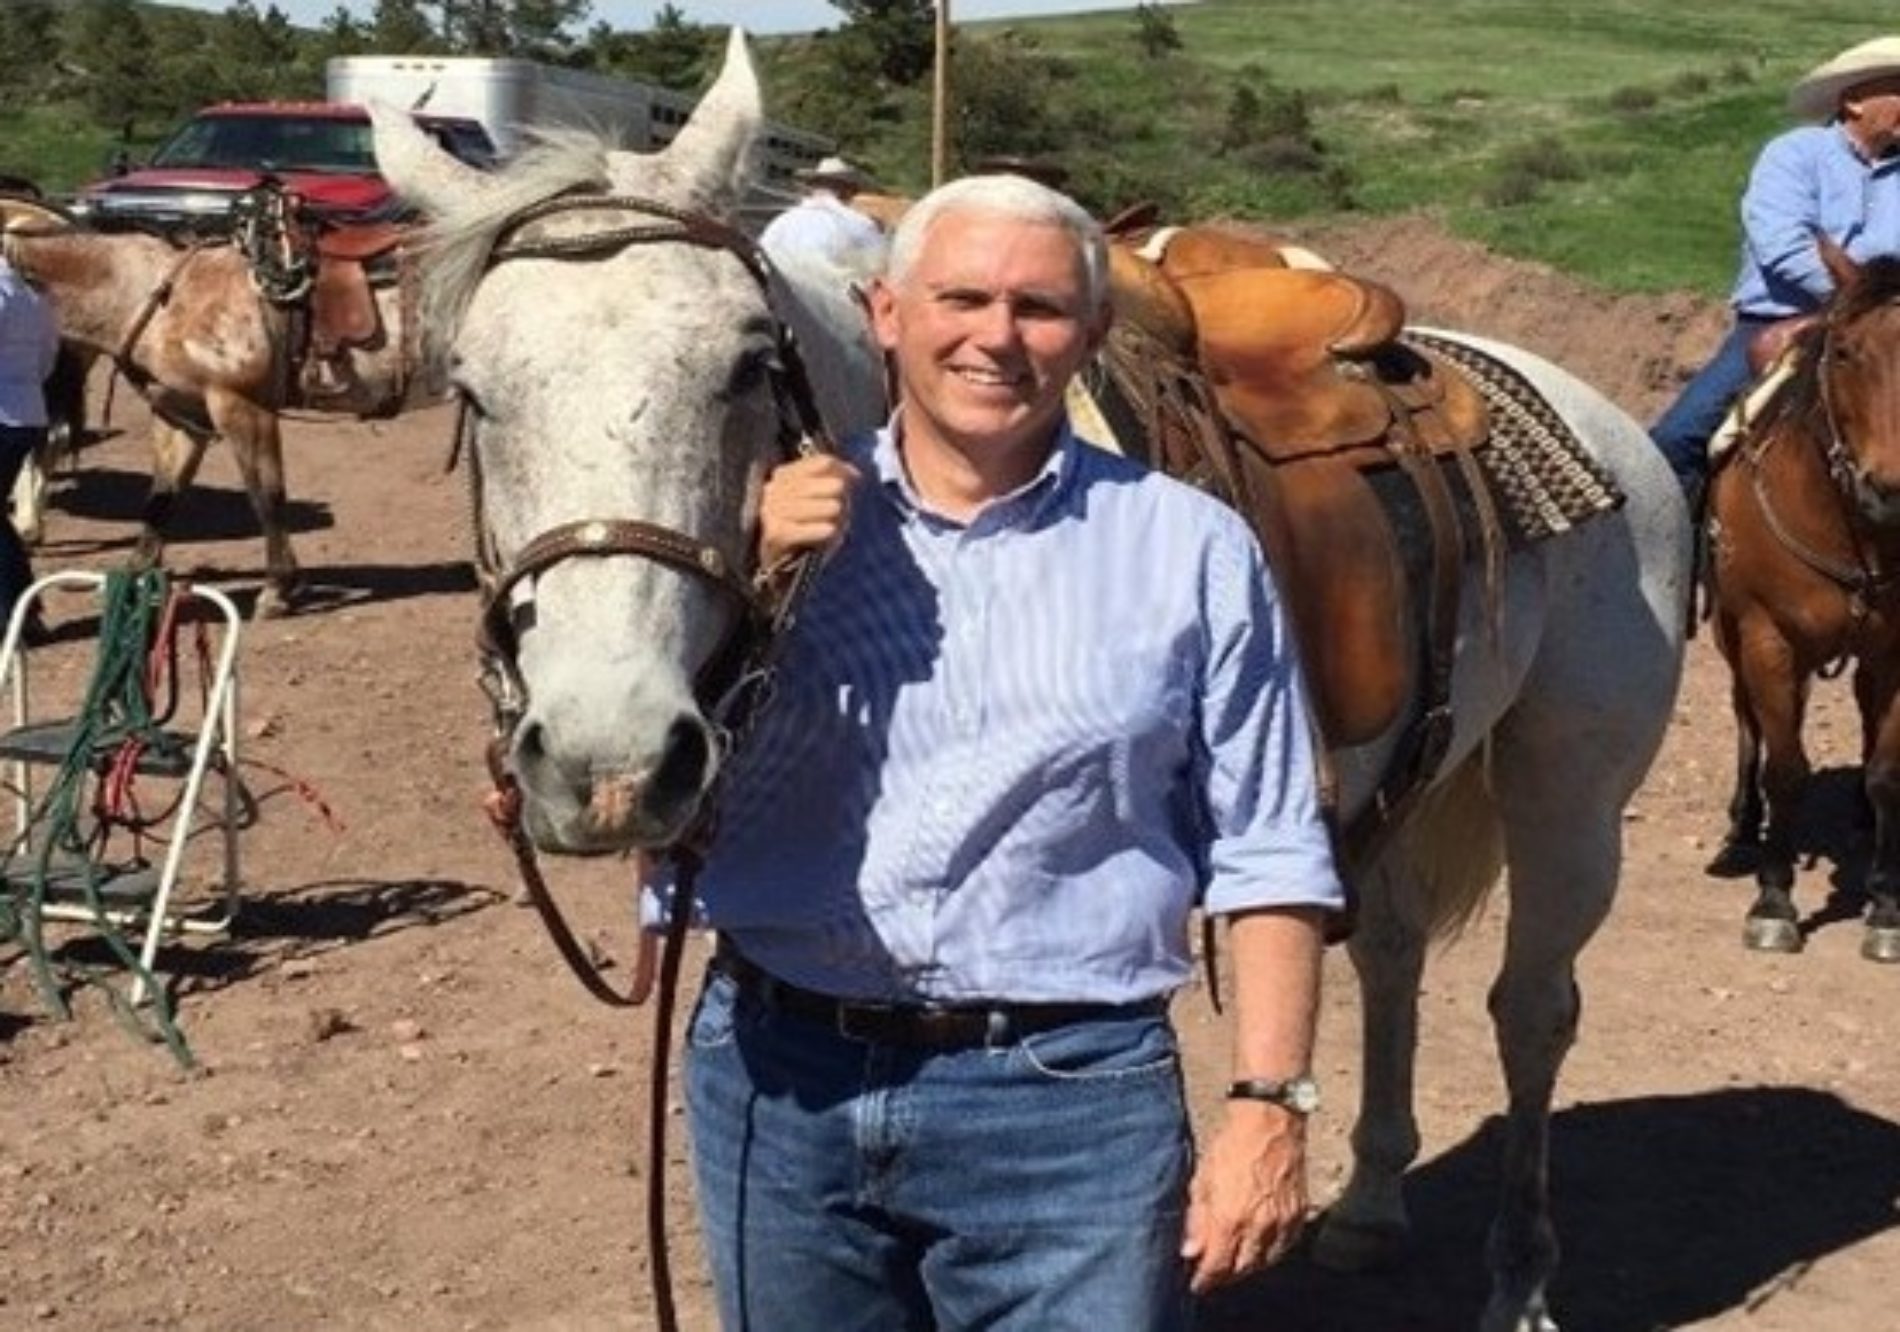 Mike Pence’s tweet about wanting a horse “inside” him that has Twitter freaking out